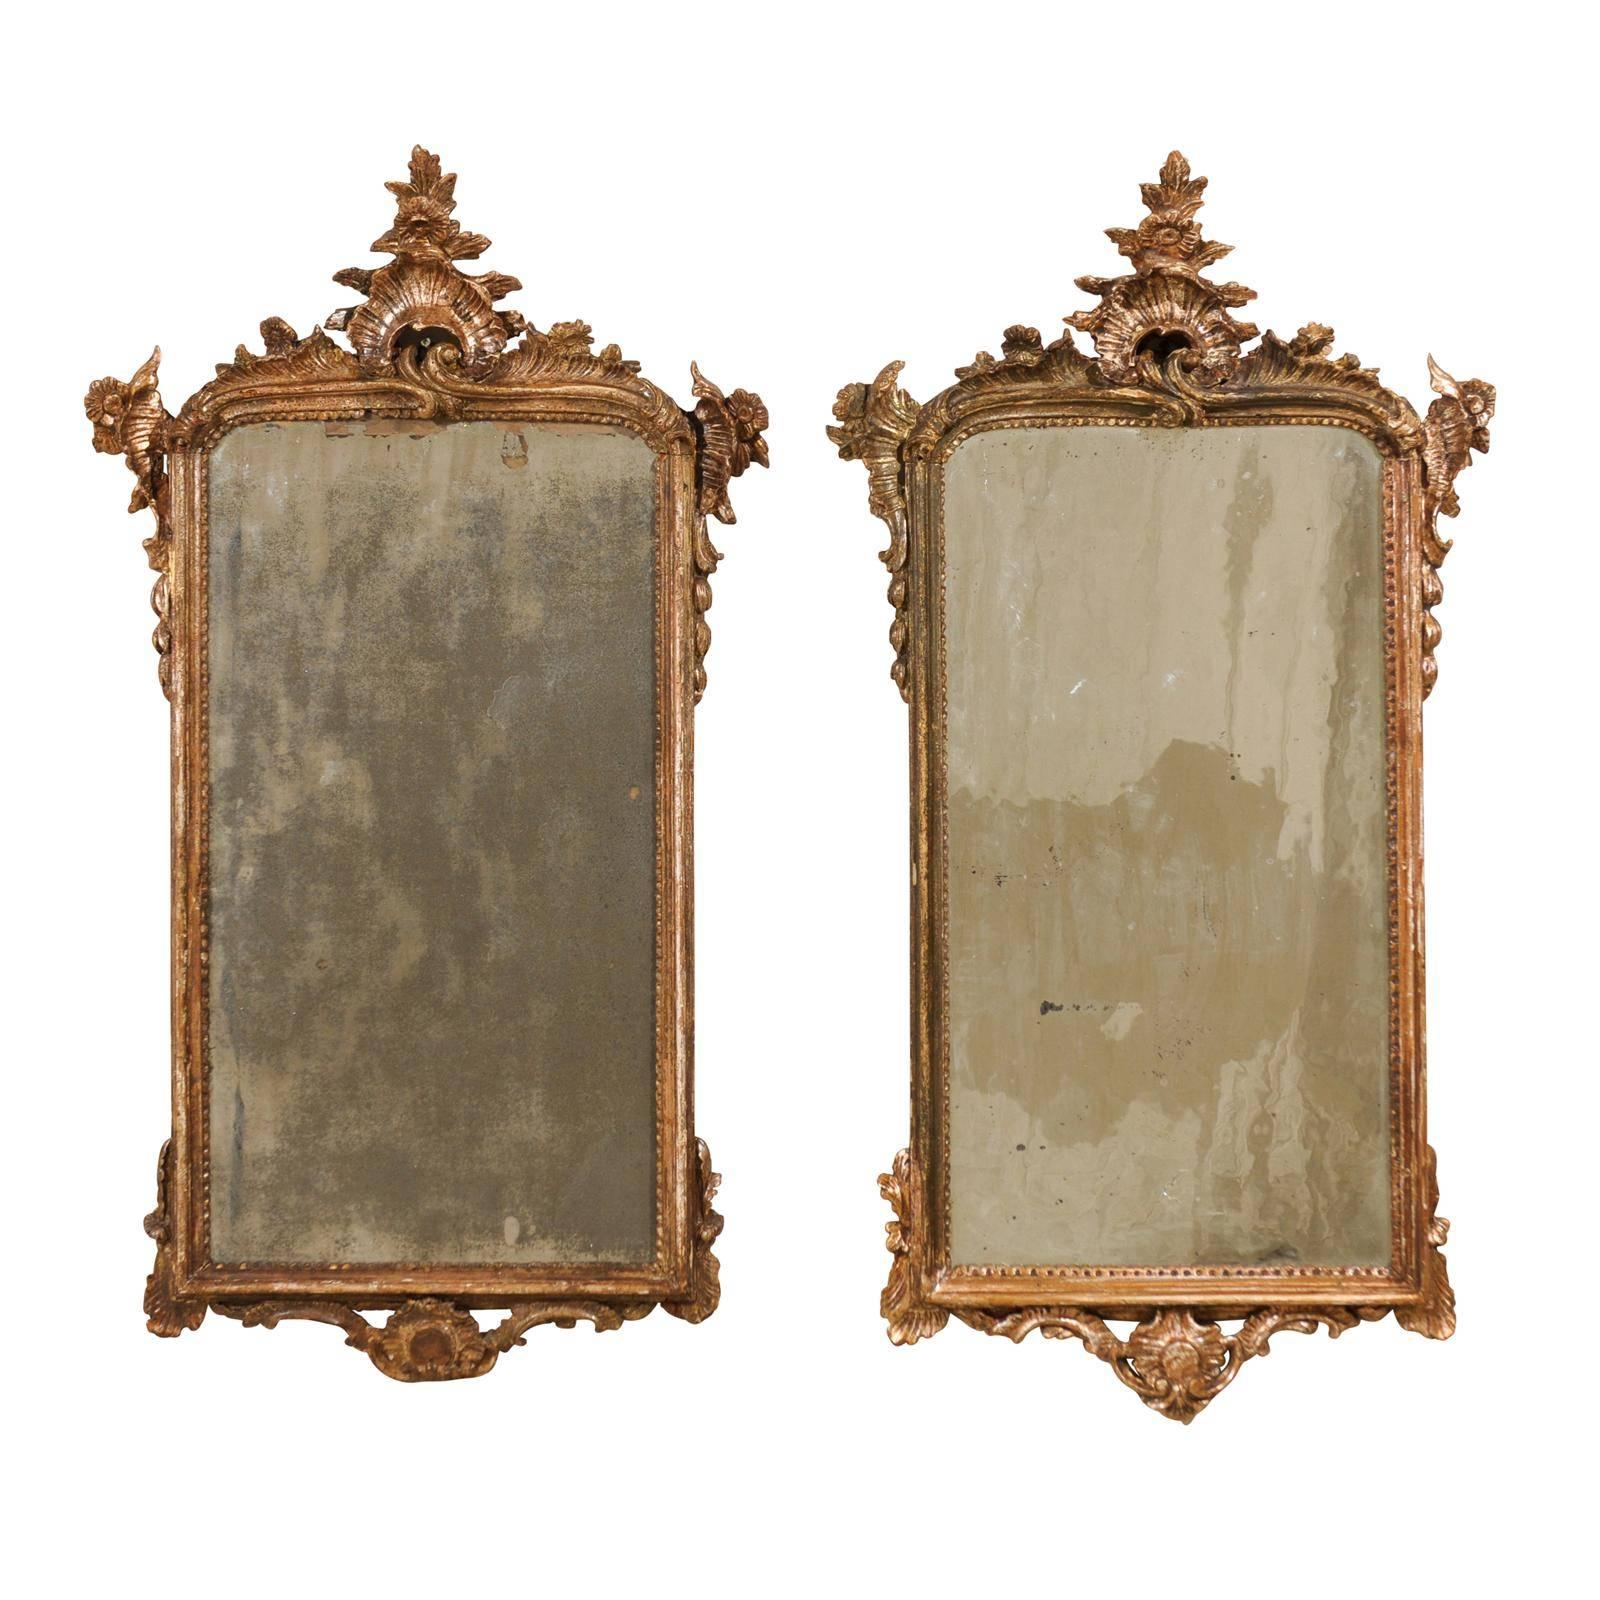 Pair of 18th Century Italian Mirrors in Rococo Style with Nicely Aged Gold Color